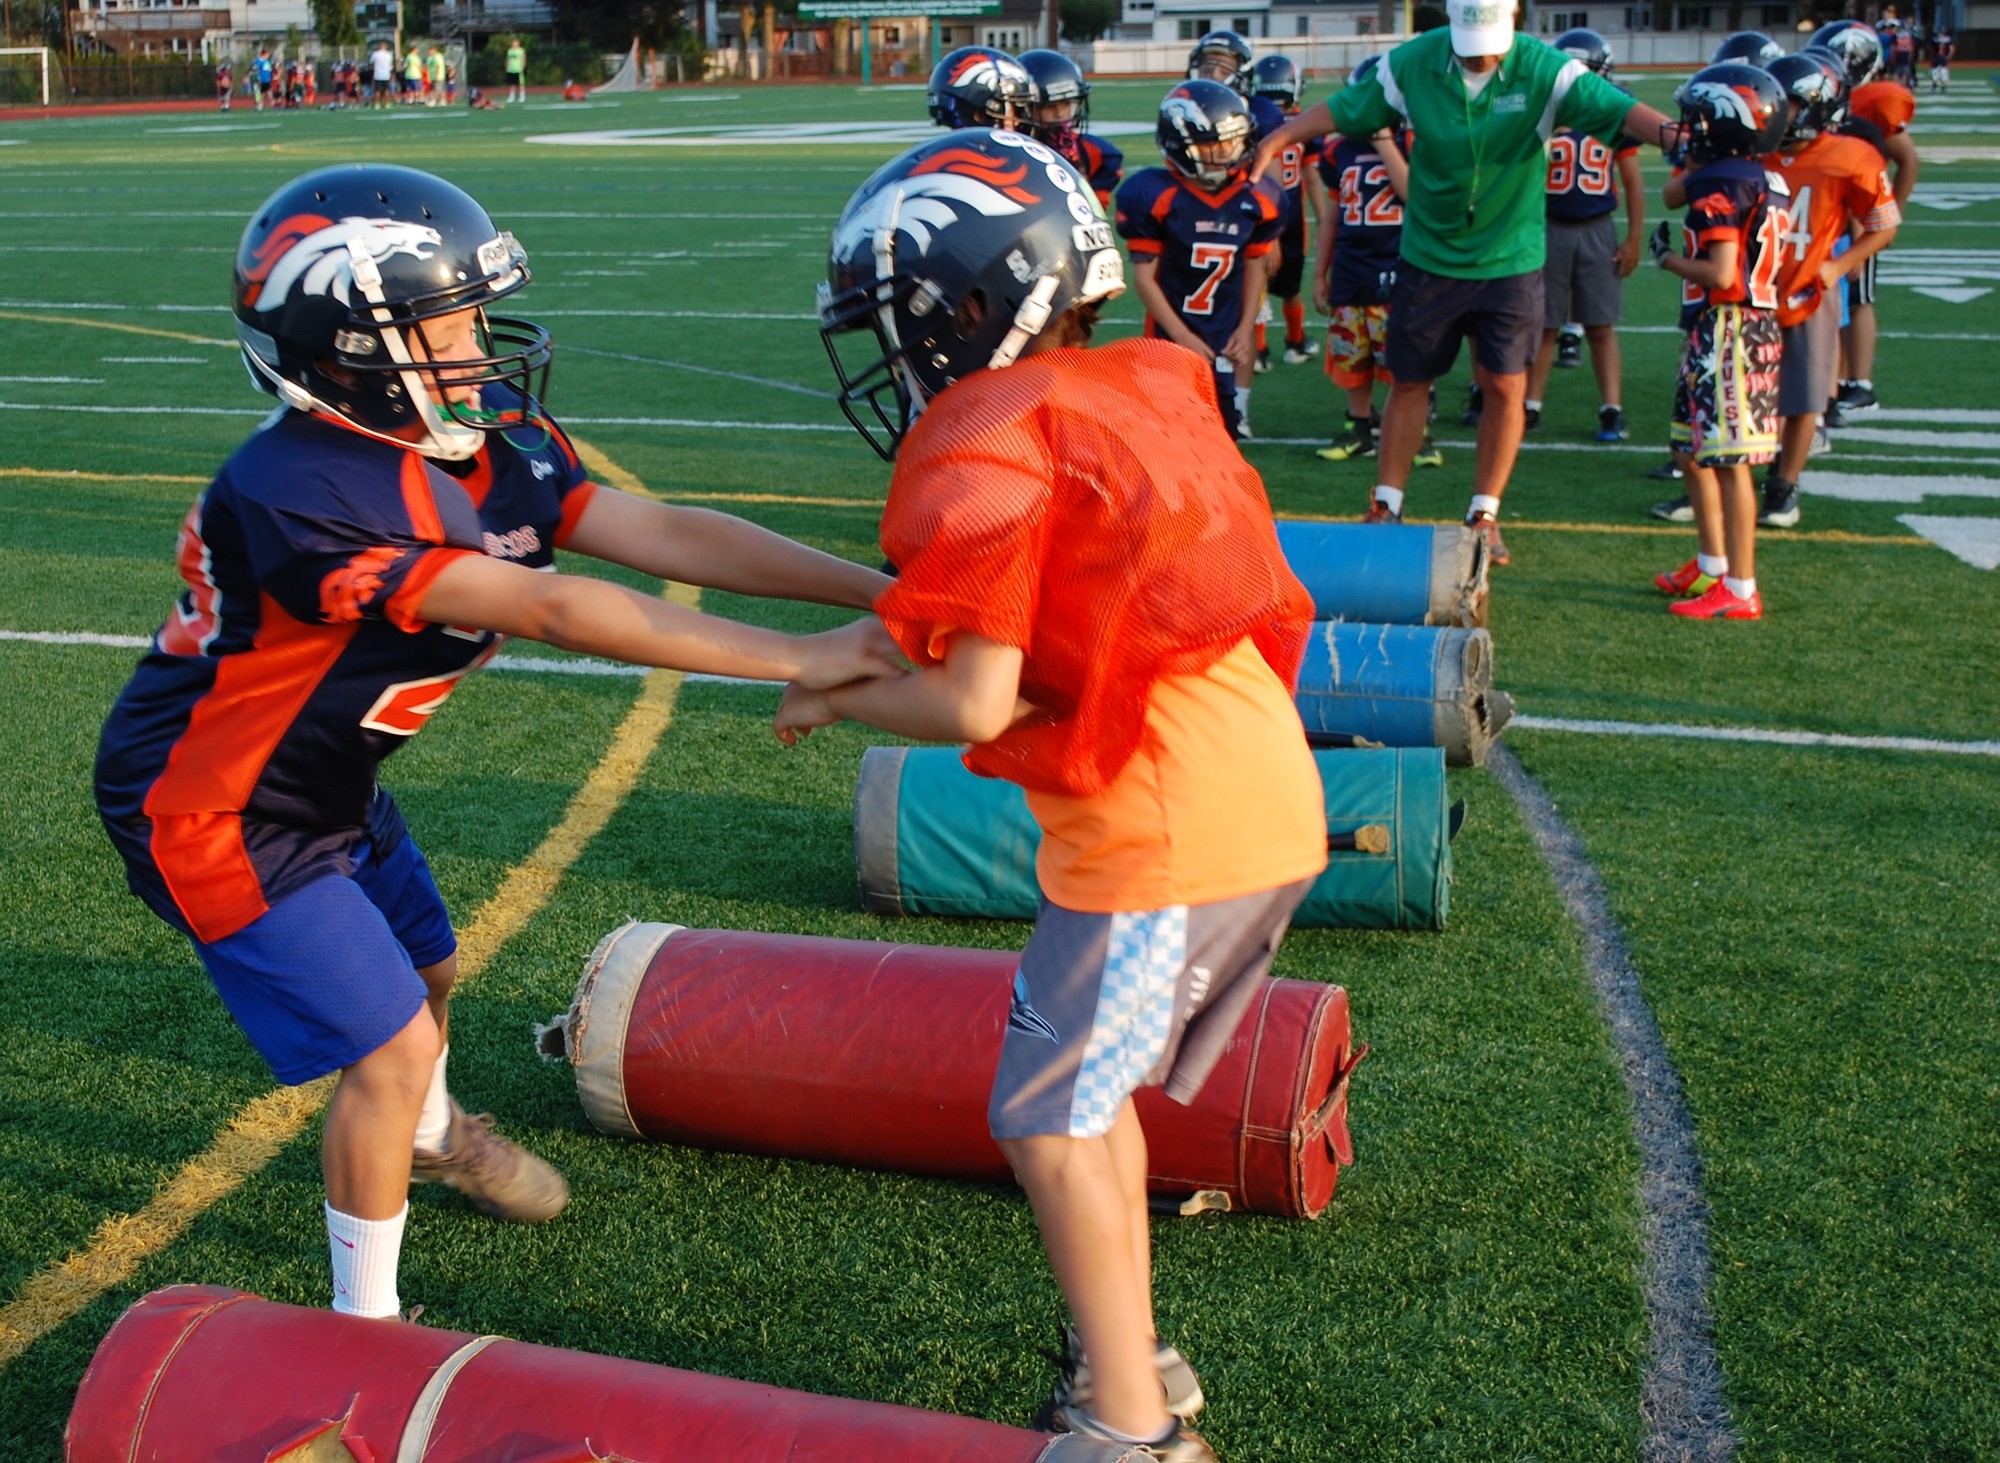 Tyler Evert, left, and A.J. Barone worked on their blocking skills during a camp which focused on the fundamentals of football.